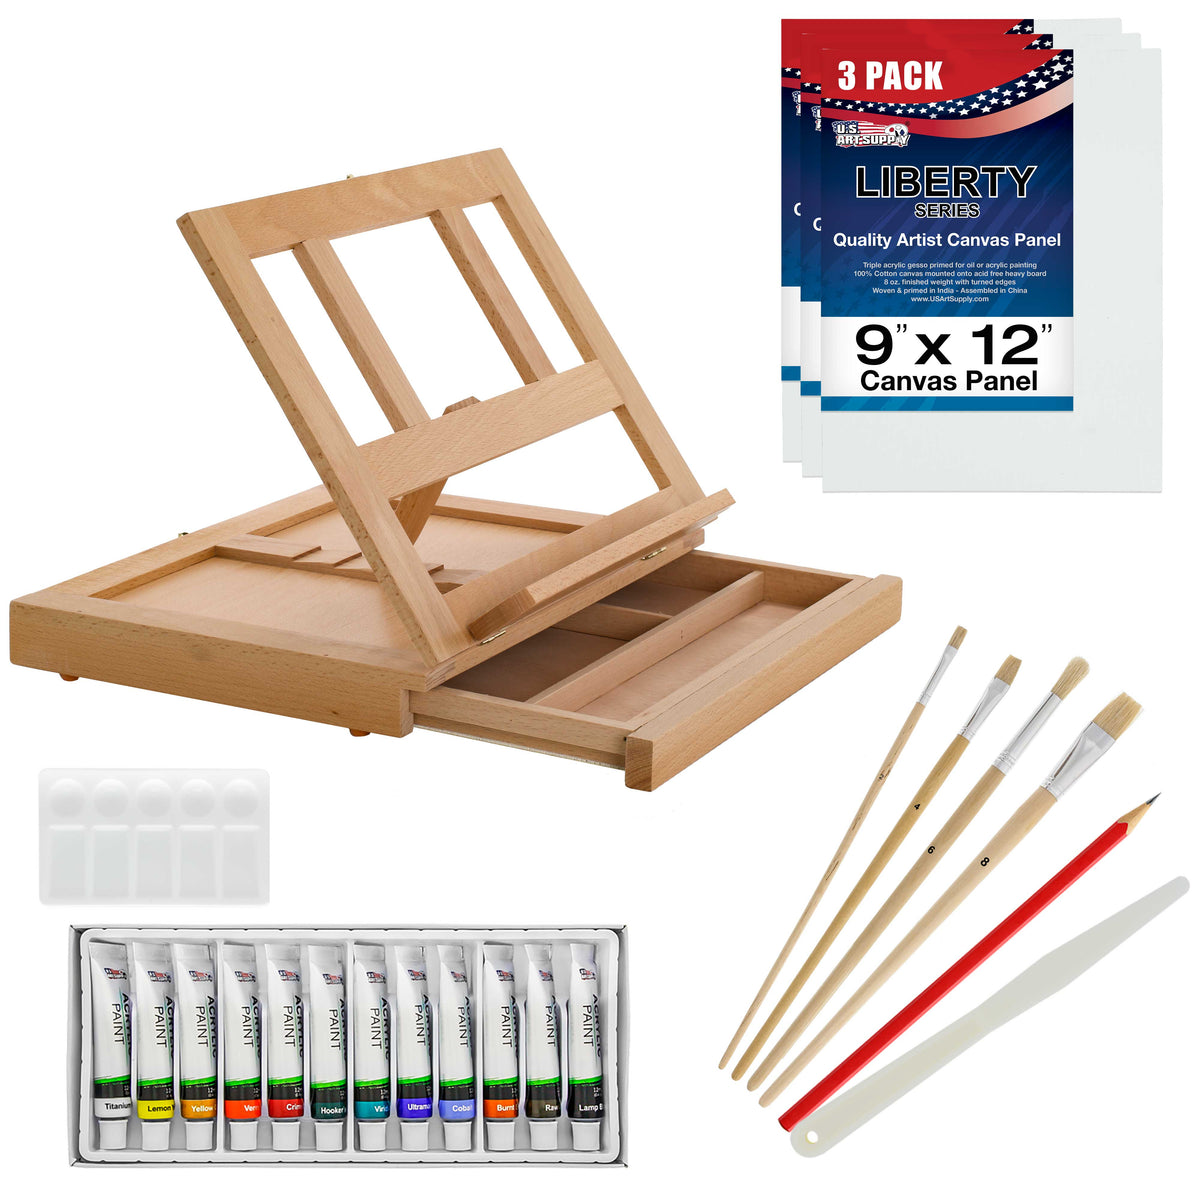 Wooden Laptop Table Easel for Painting - China Easel, Table Easel